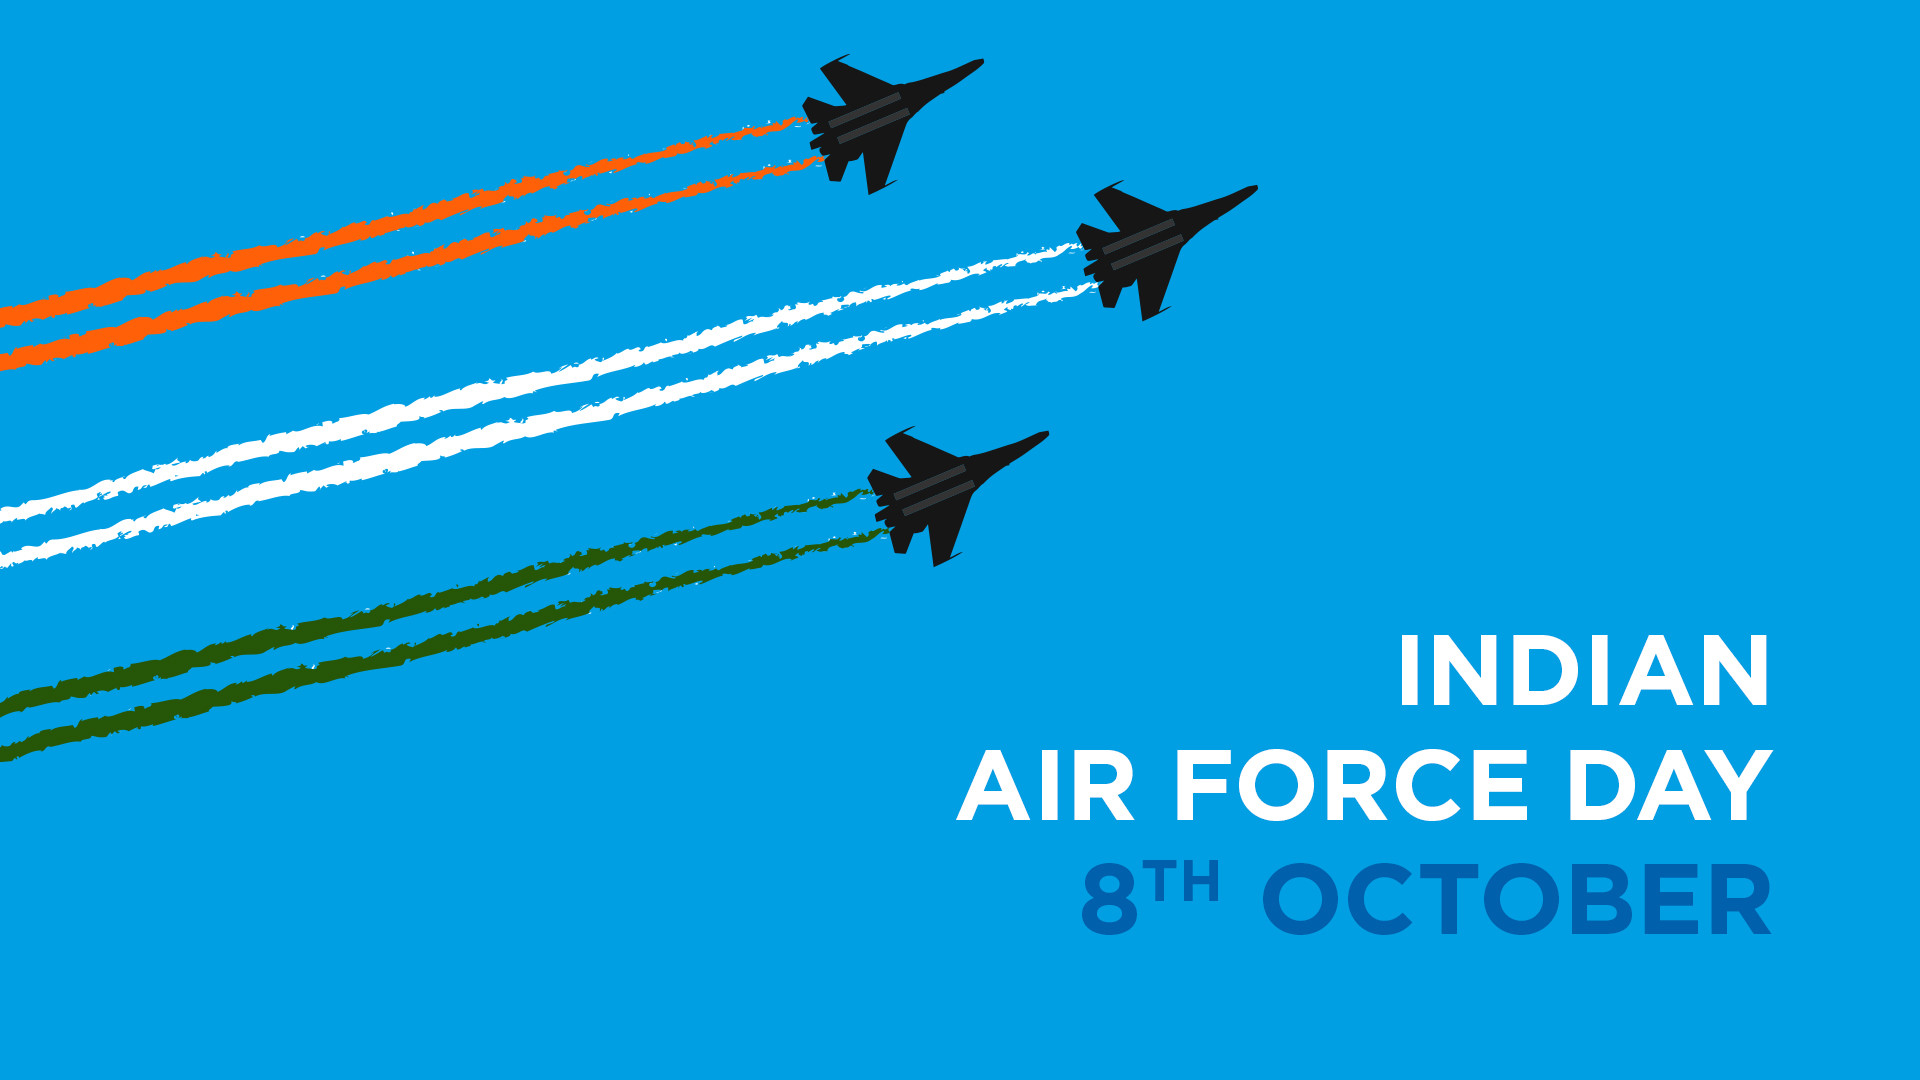 Happy Indian Air Force Day - PBS India